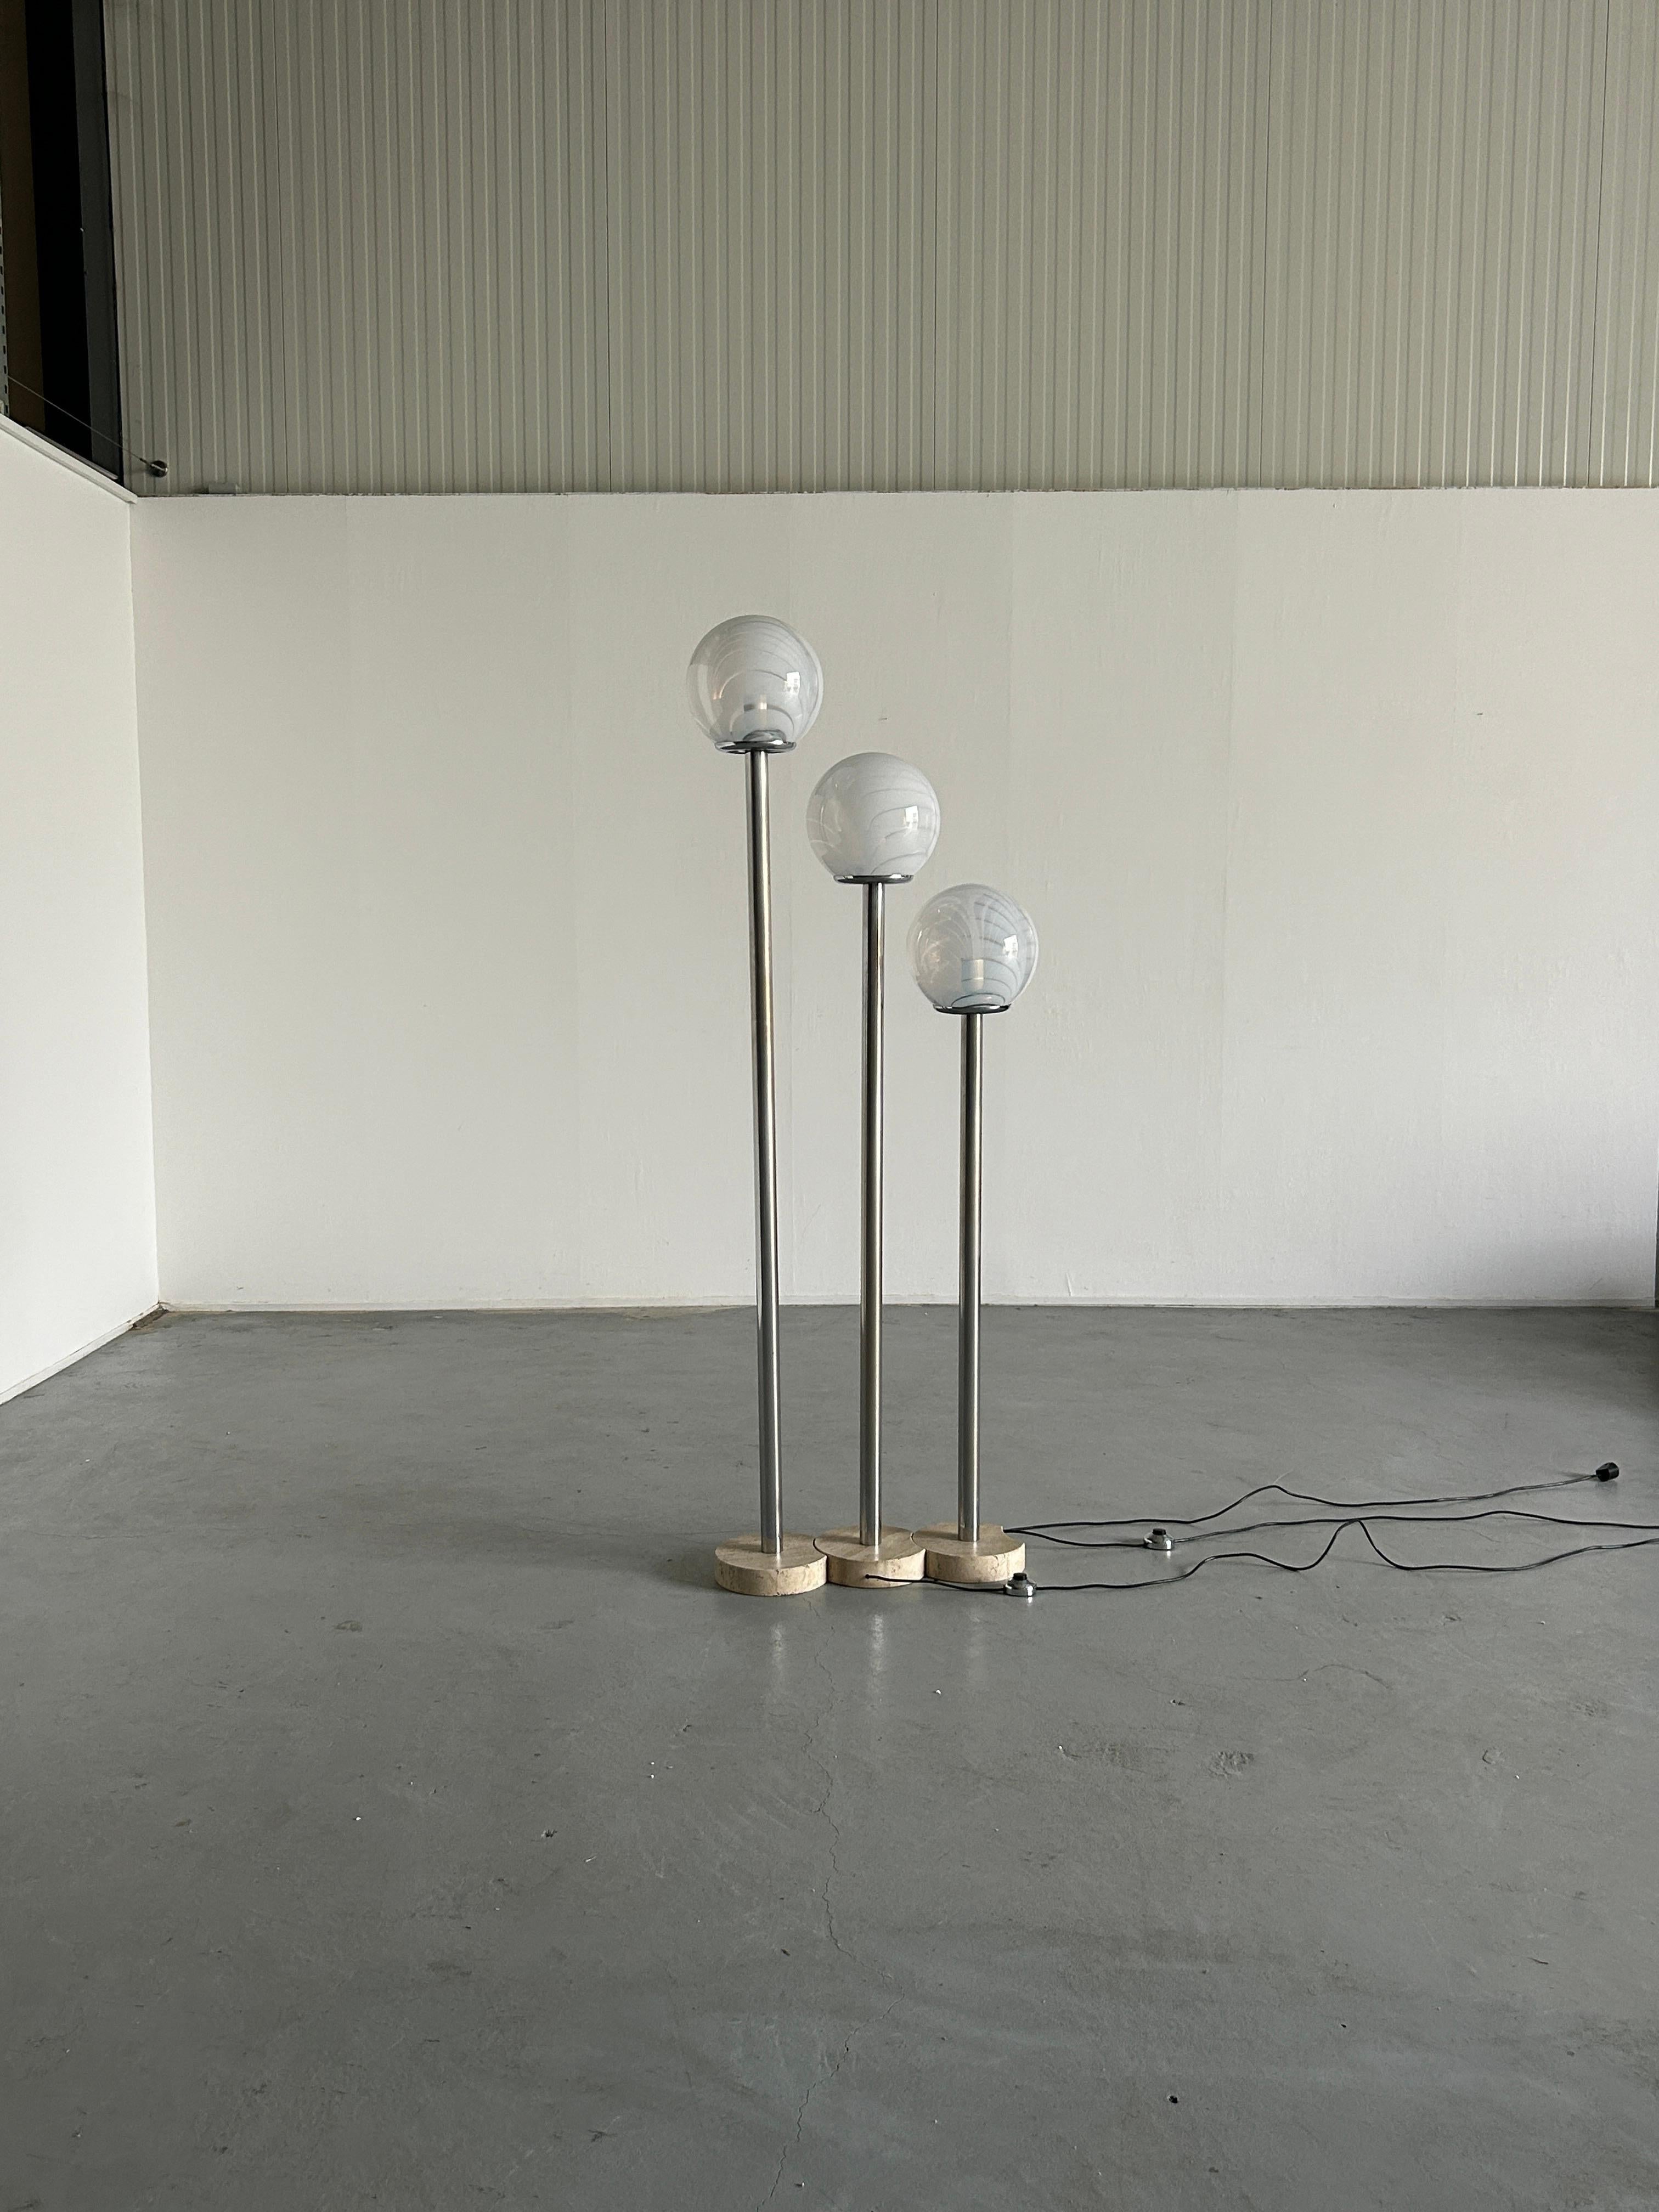 A Mid-century Modern floor lamp by Massimo & Lella Vignelli for Venini, consisting of three individual lamps, made from a travertine base, metal stem, and Murano glass globes.
Sold as a set of three.
Very good vintage condition with normal